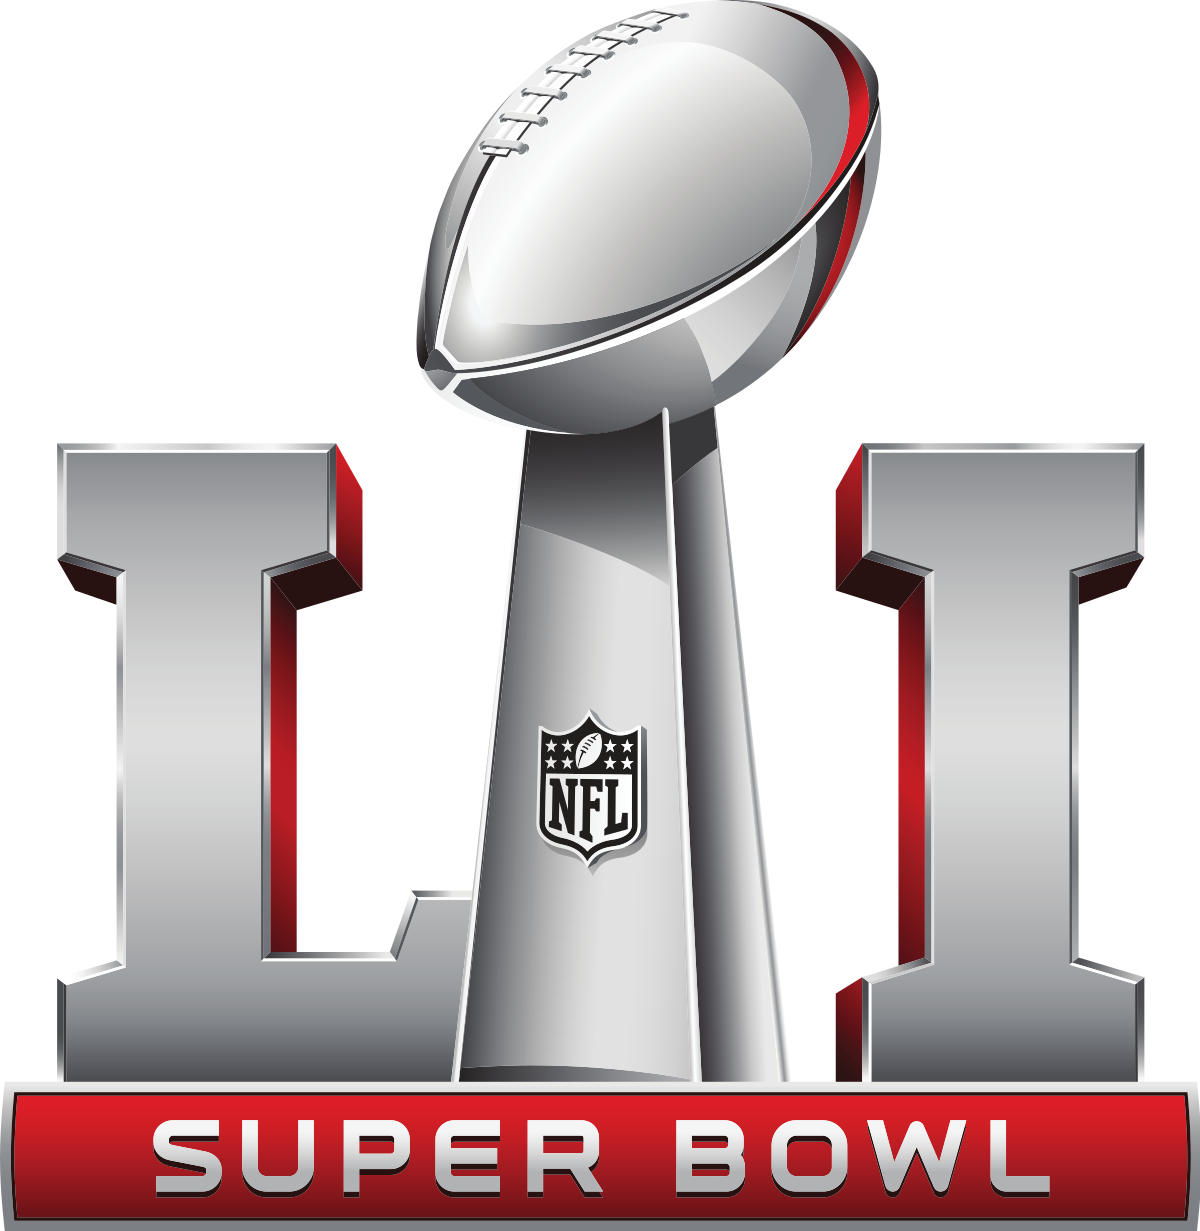 The new super bowl 2021 logo (above) looks almost exactly like the logo for...